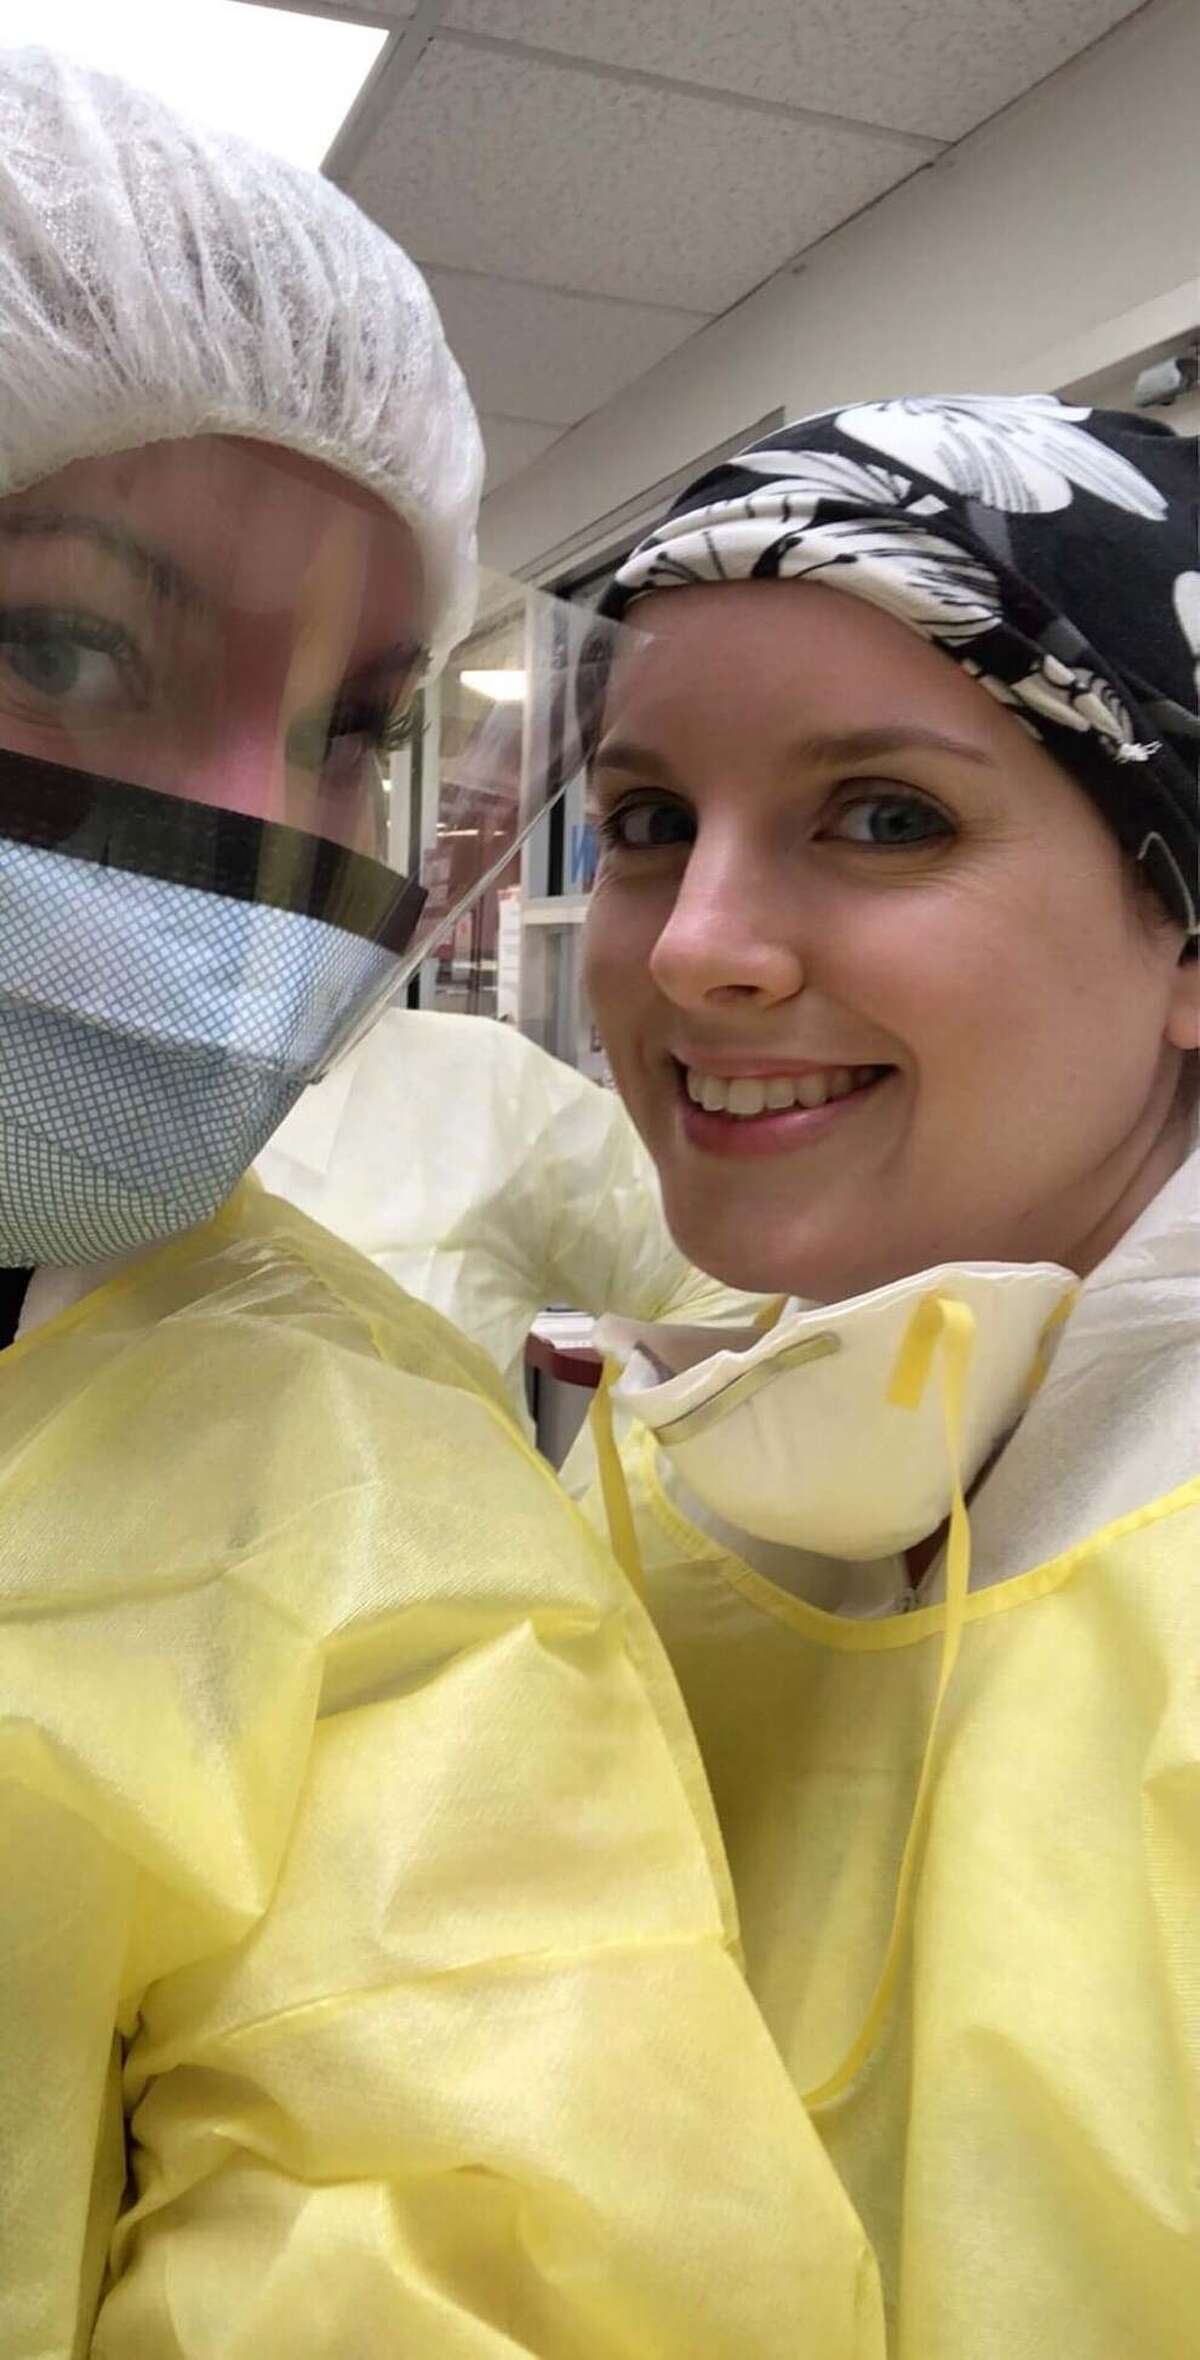 Janice Ceccucci (right) is volunteering on the front lines of the coronavirus pandemic at hard-hit New York Community Hospital in Brooklyn. The 39-year-old nurse practitioner took a leave of absence last month from her part-time job in Saratoga Hospital’s emergency department so she could help downstate hospitals overwhelmed by coronavirus patients. (Provided by Janice Ceccucci)